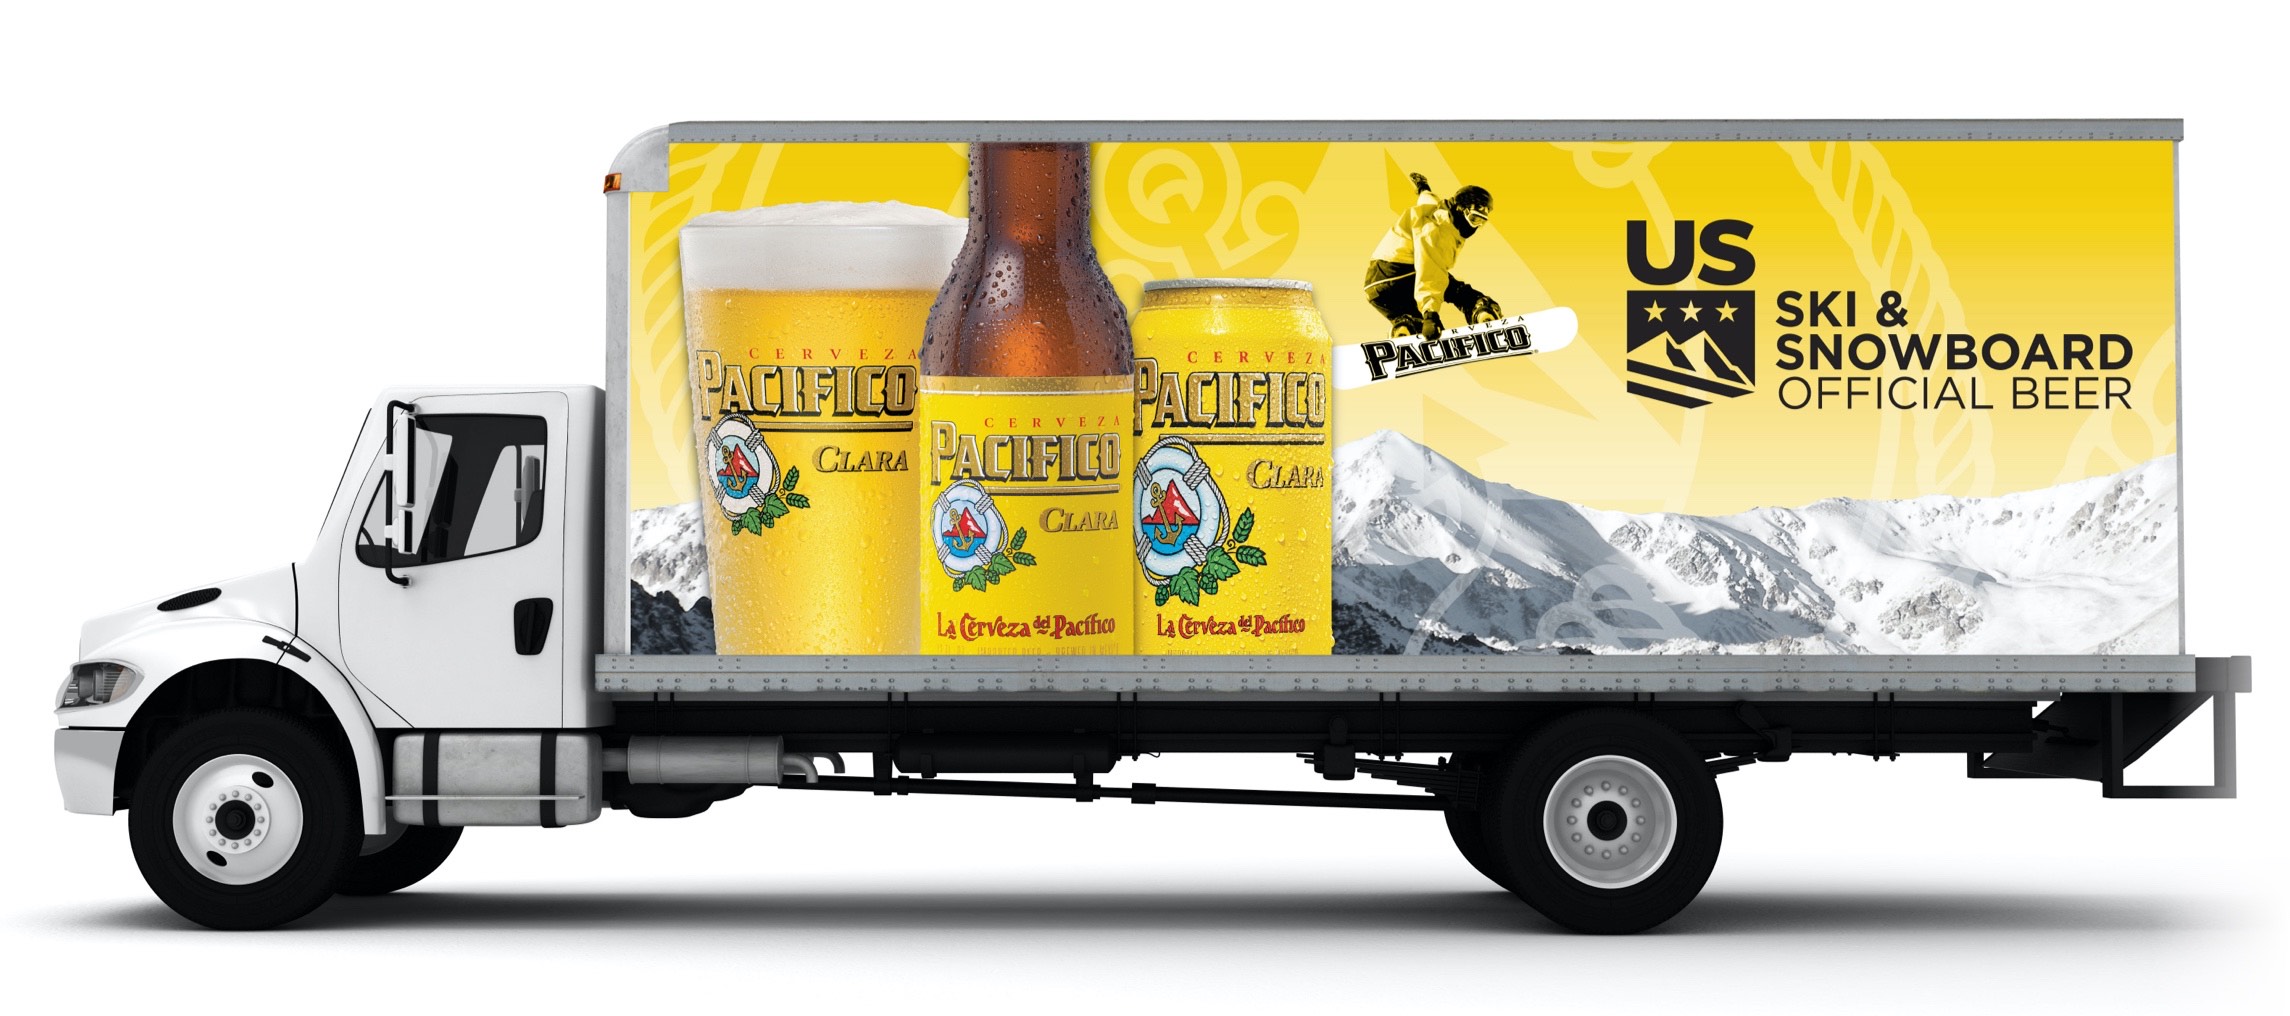 Photograph of a Pacifico delivery truck.